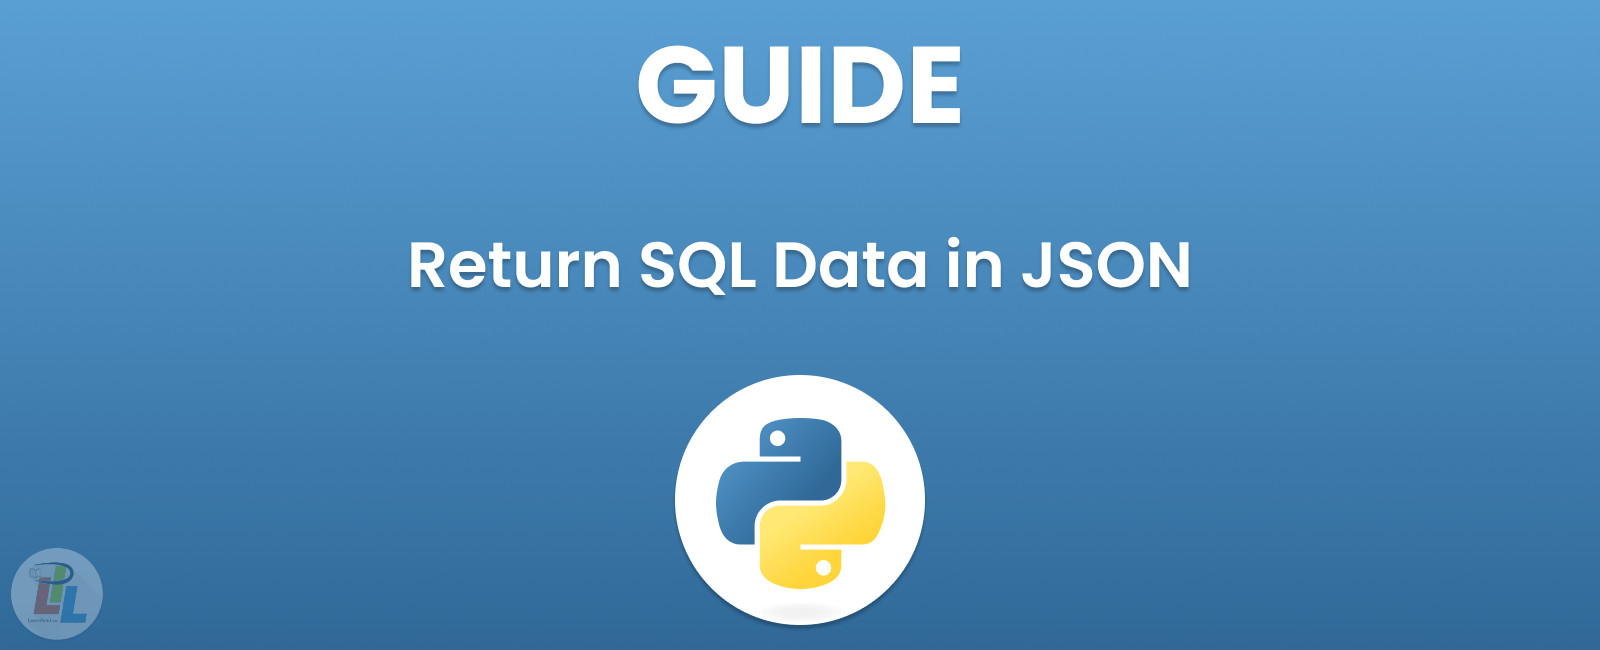 How to Return SQL Data in JSON Format Python